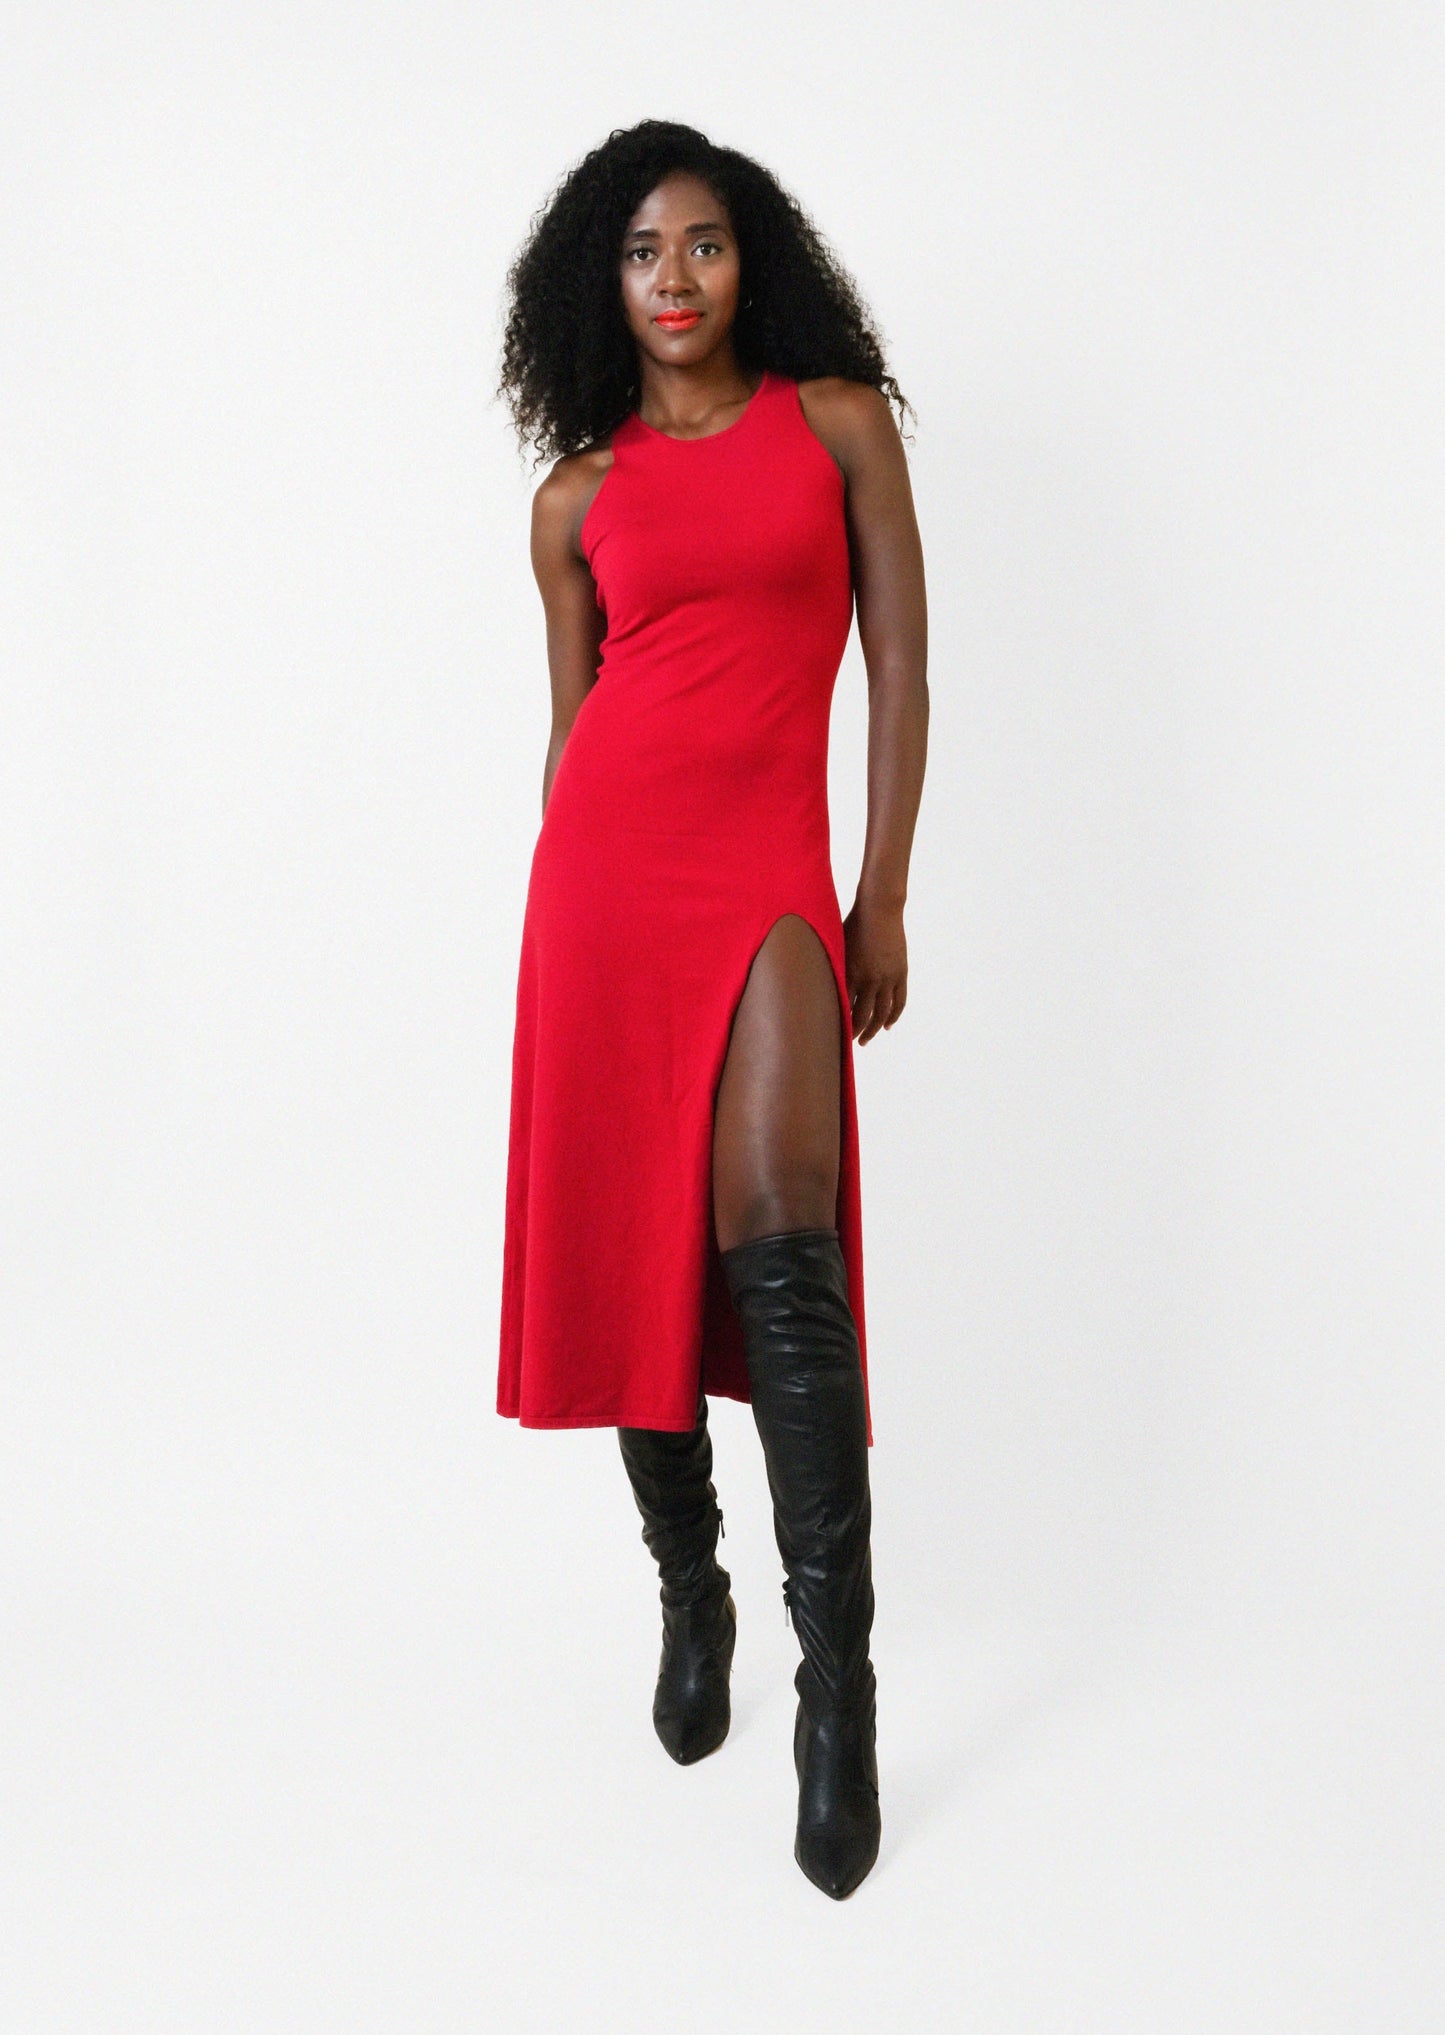 KELLY VERY HIGH SLIT KNIT DRESS IN SCARLET RED